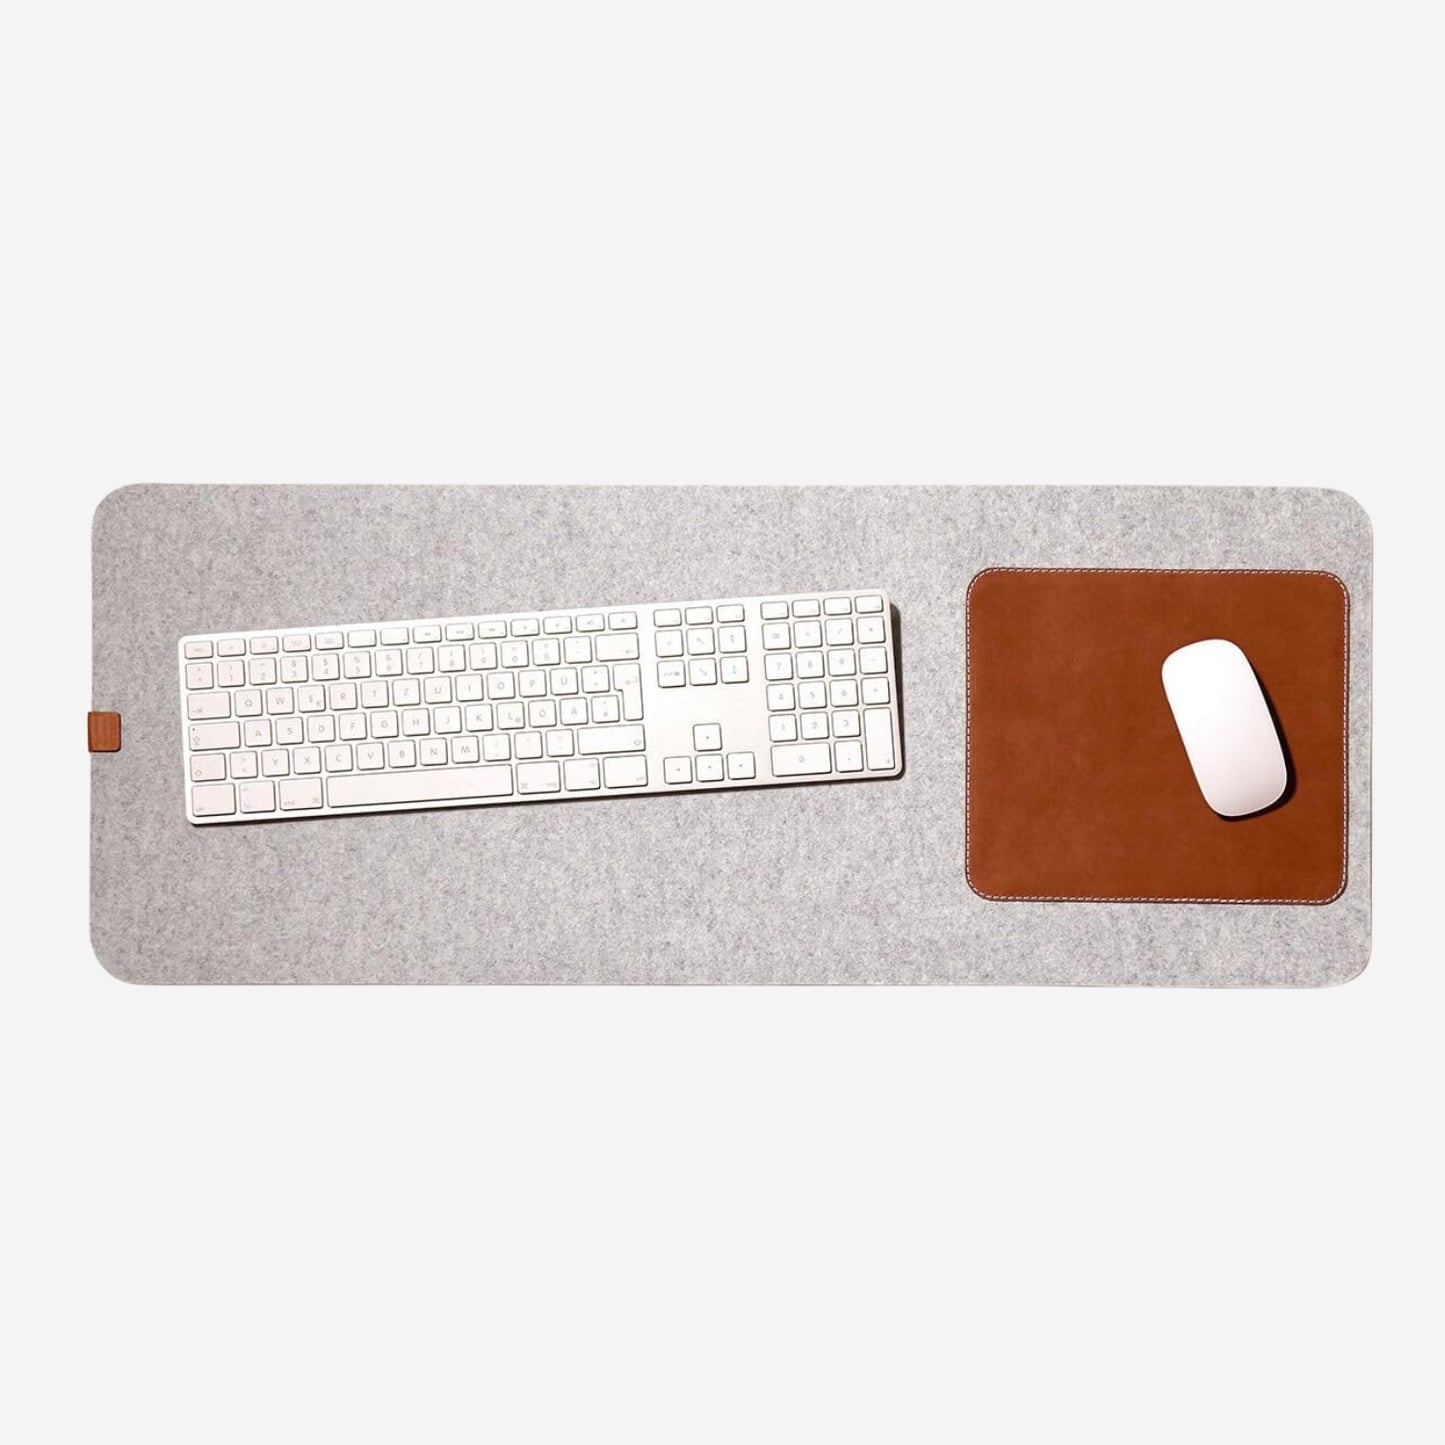 Tierno Combo of 3 - Premium Felt Desk Set with Tray, and Coasters